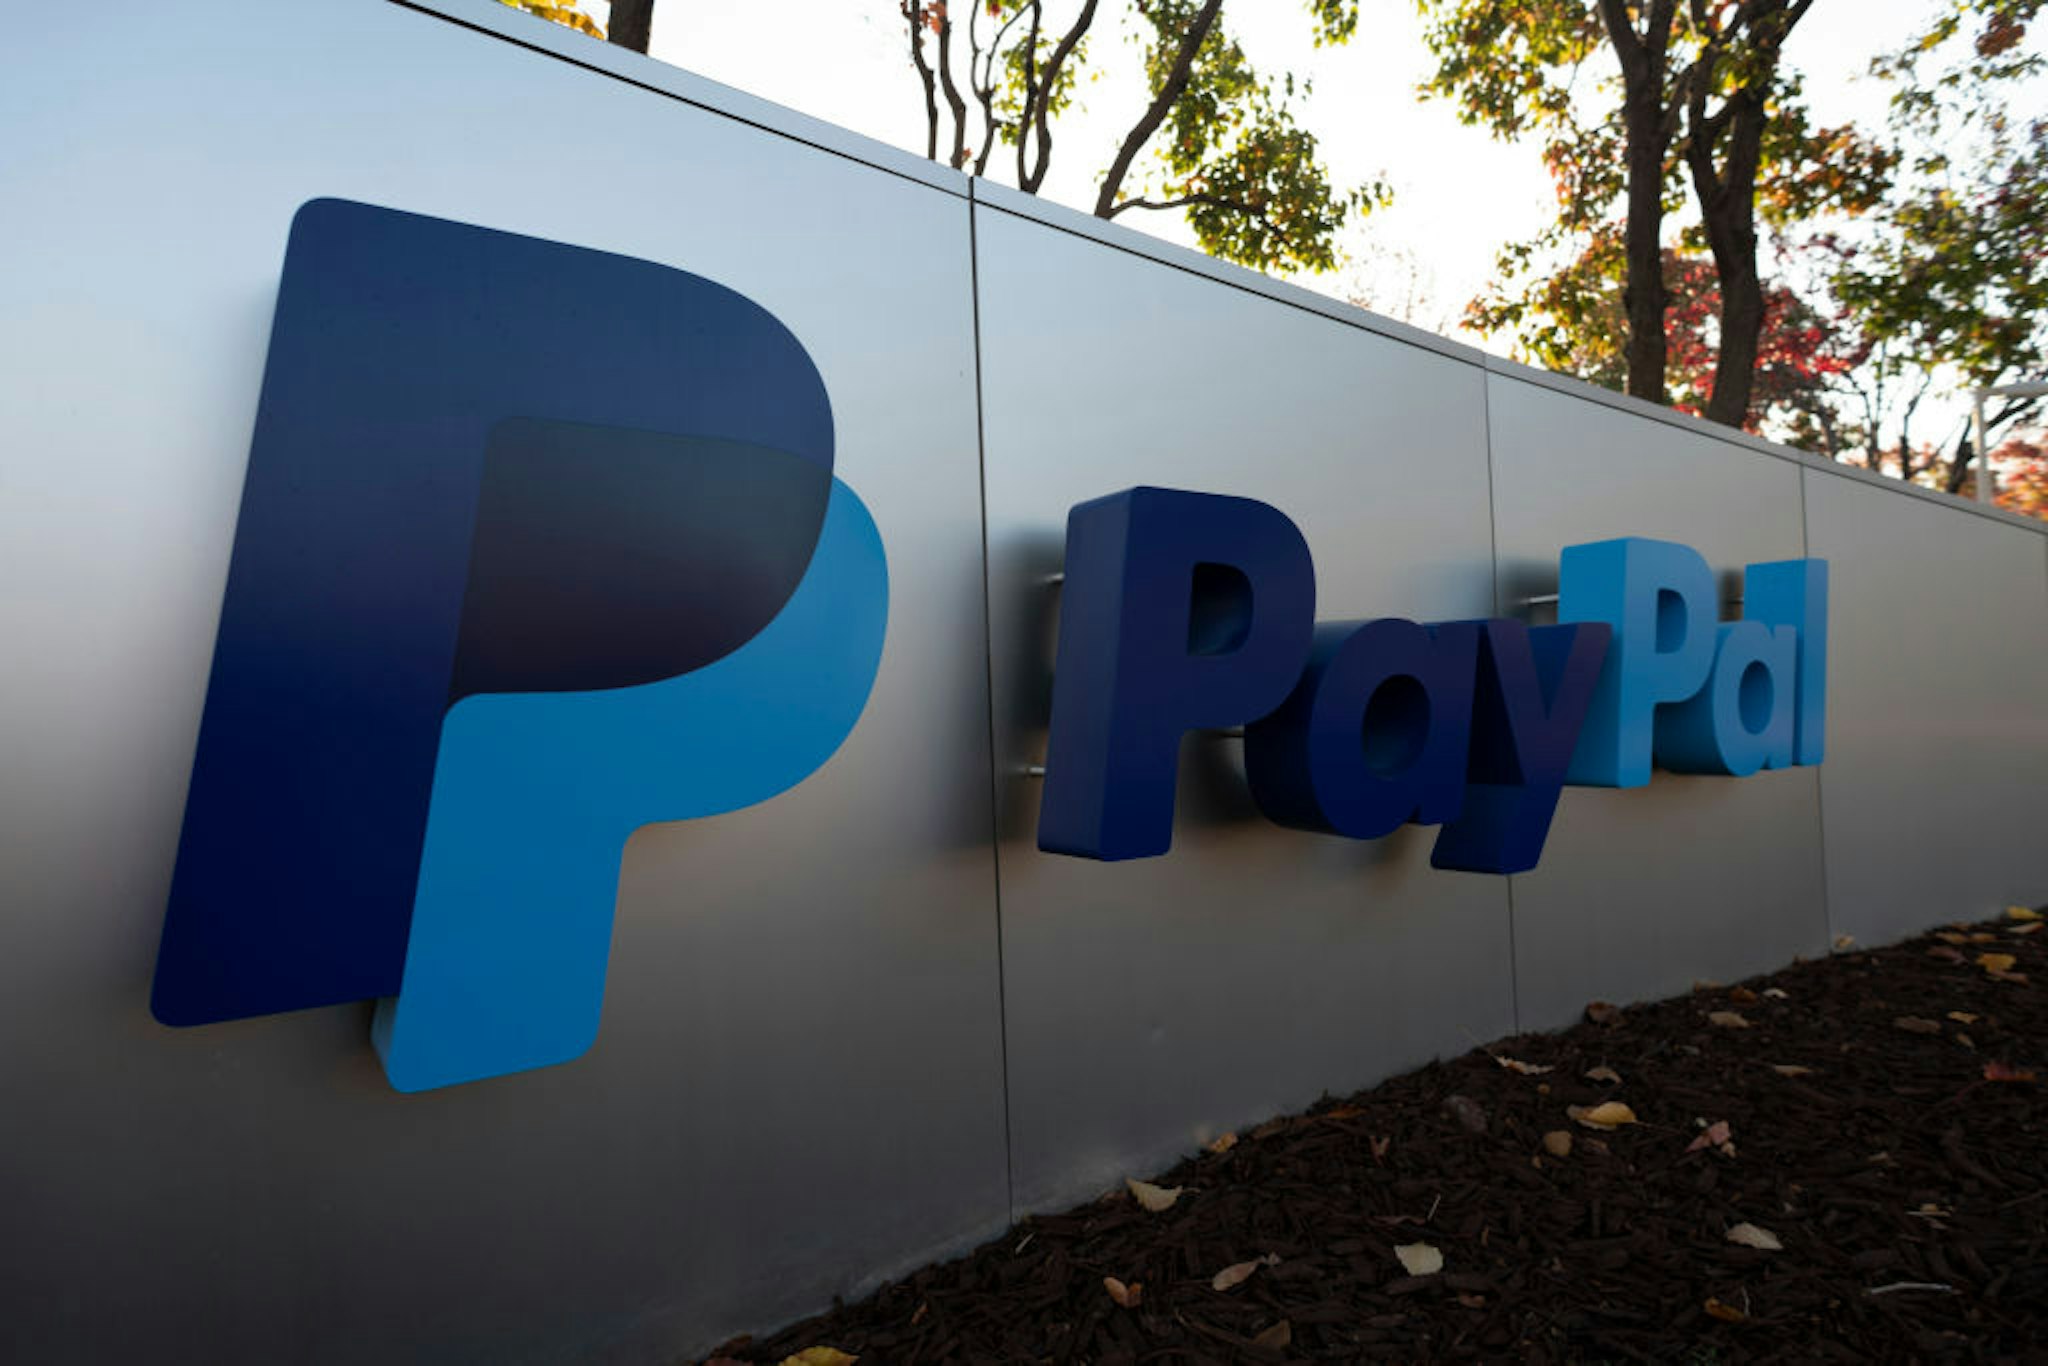 PayPal logo can be seen at its office in San Jose, California, United States on November 23, 2019. PayPal has agreed to acquire Honey Science Corporation, a rapidly-growing technology platform for shopping and rewards, for approximately $4 billion. (Photo by Yichuan Cao/NurPhoto via Getty Images)